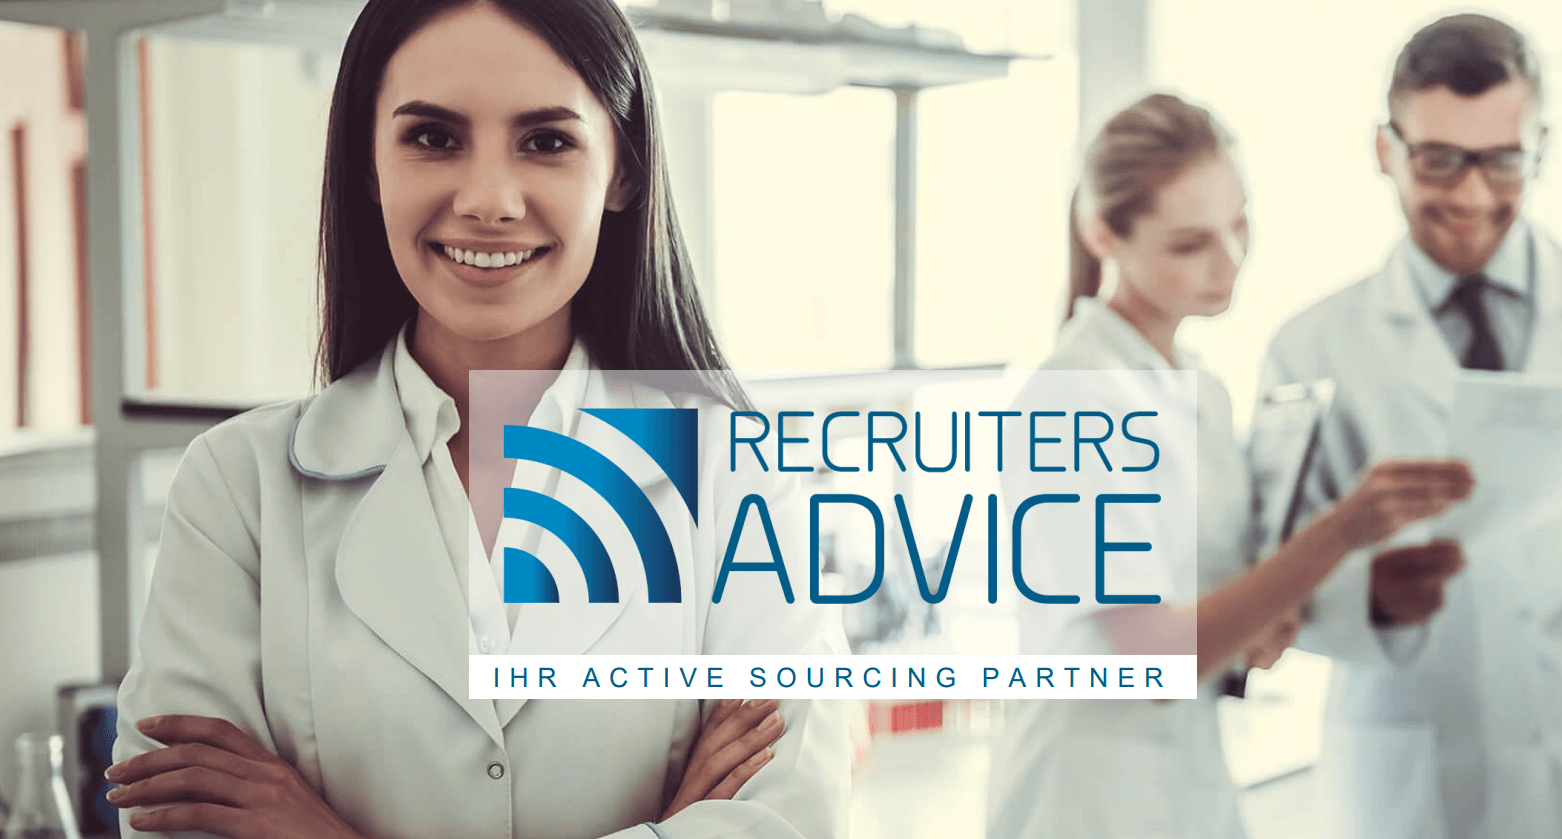 Recruiters Advice - Active Sourcing